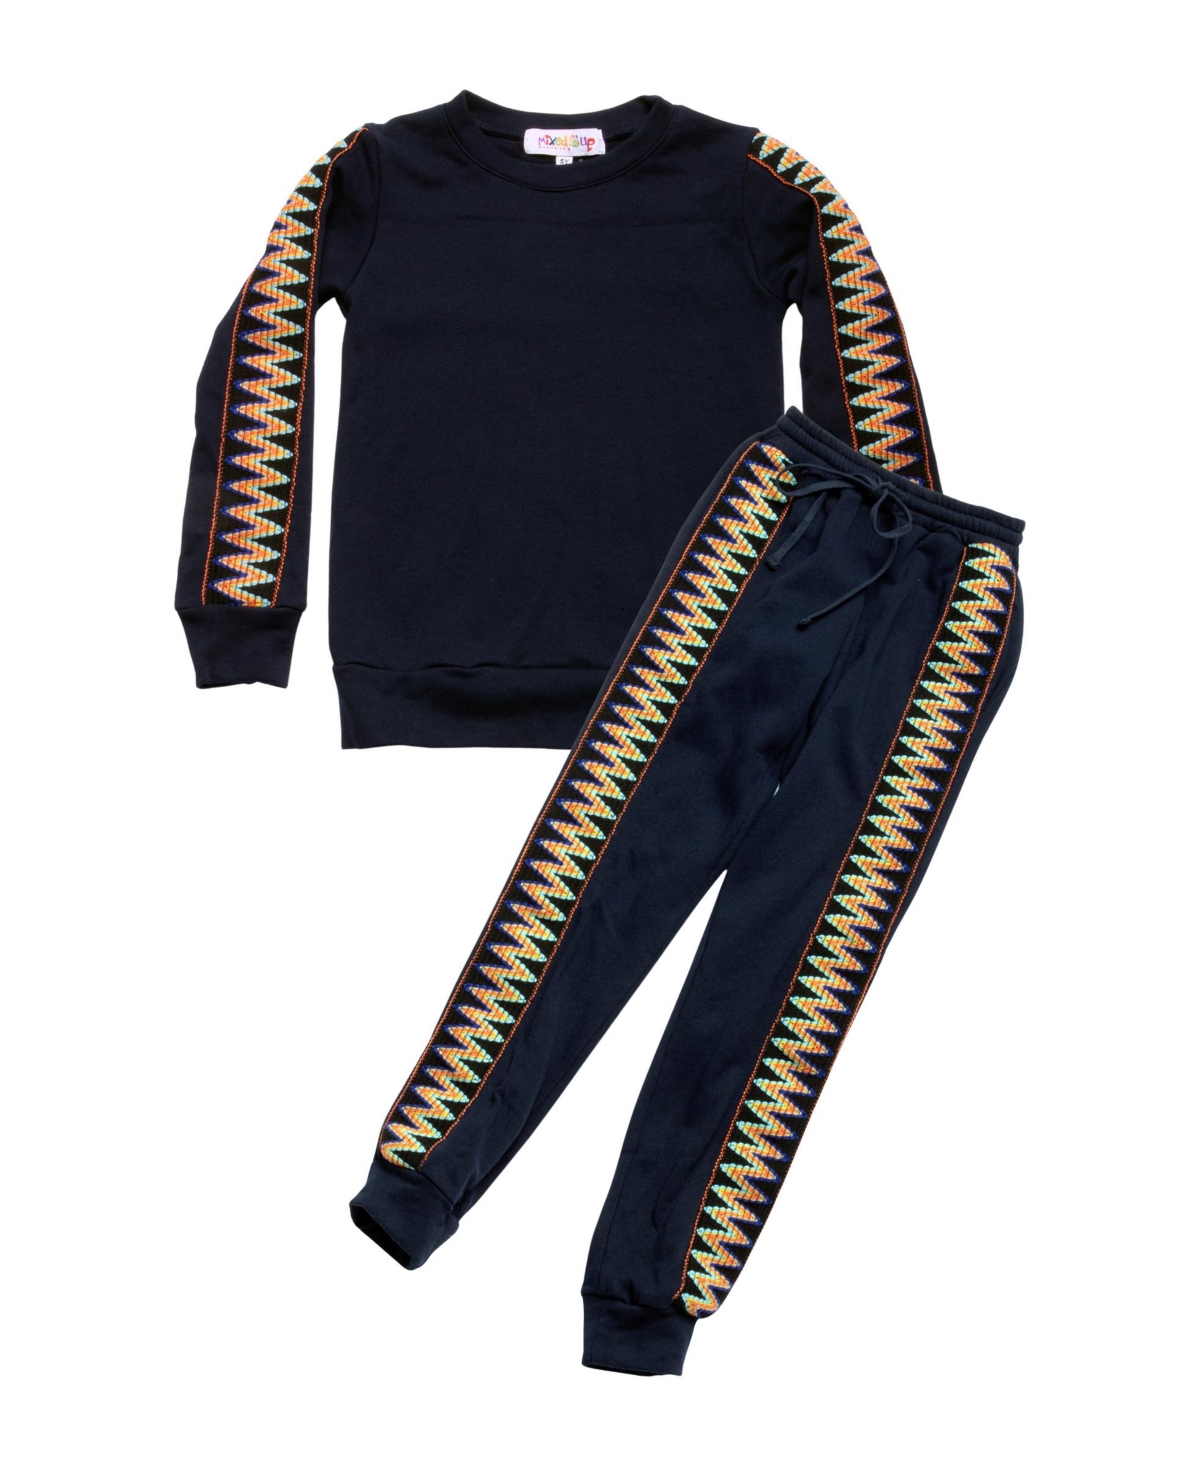 Mixed Up Clothing Little Boys Easy Pull-on Sweatpants Joggers And Sweatshirt, 2 Piece Set In Navy